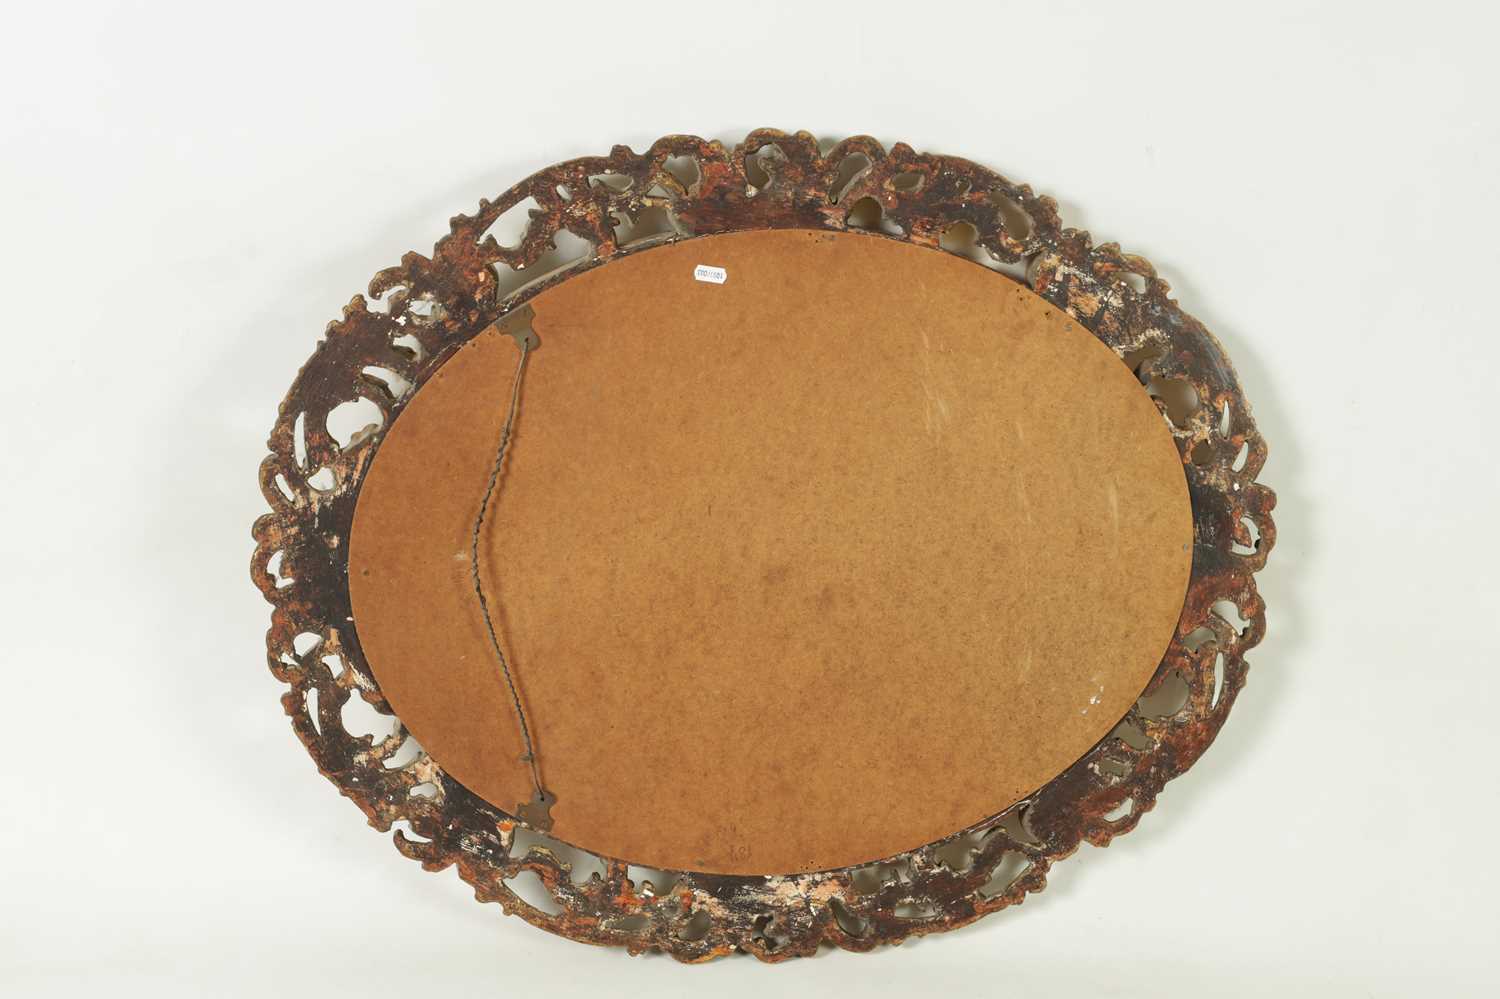 A LARGE OVAL 19TH CENTURY FLORENTINE CARVED GILT WOOD FRAMED MIRROR - Image 6 of 6